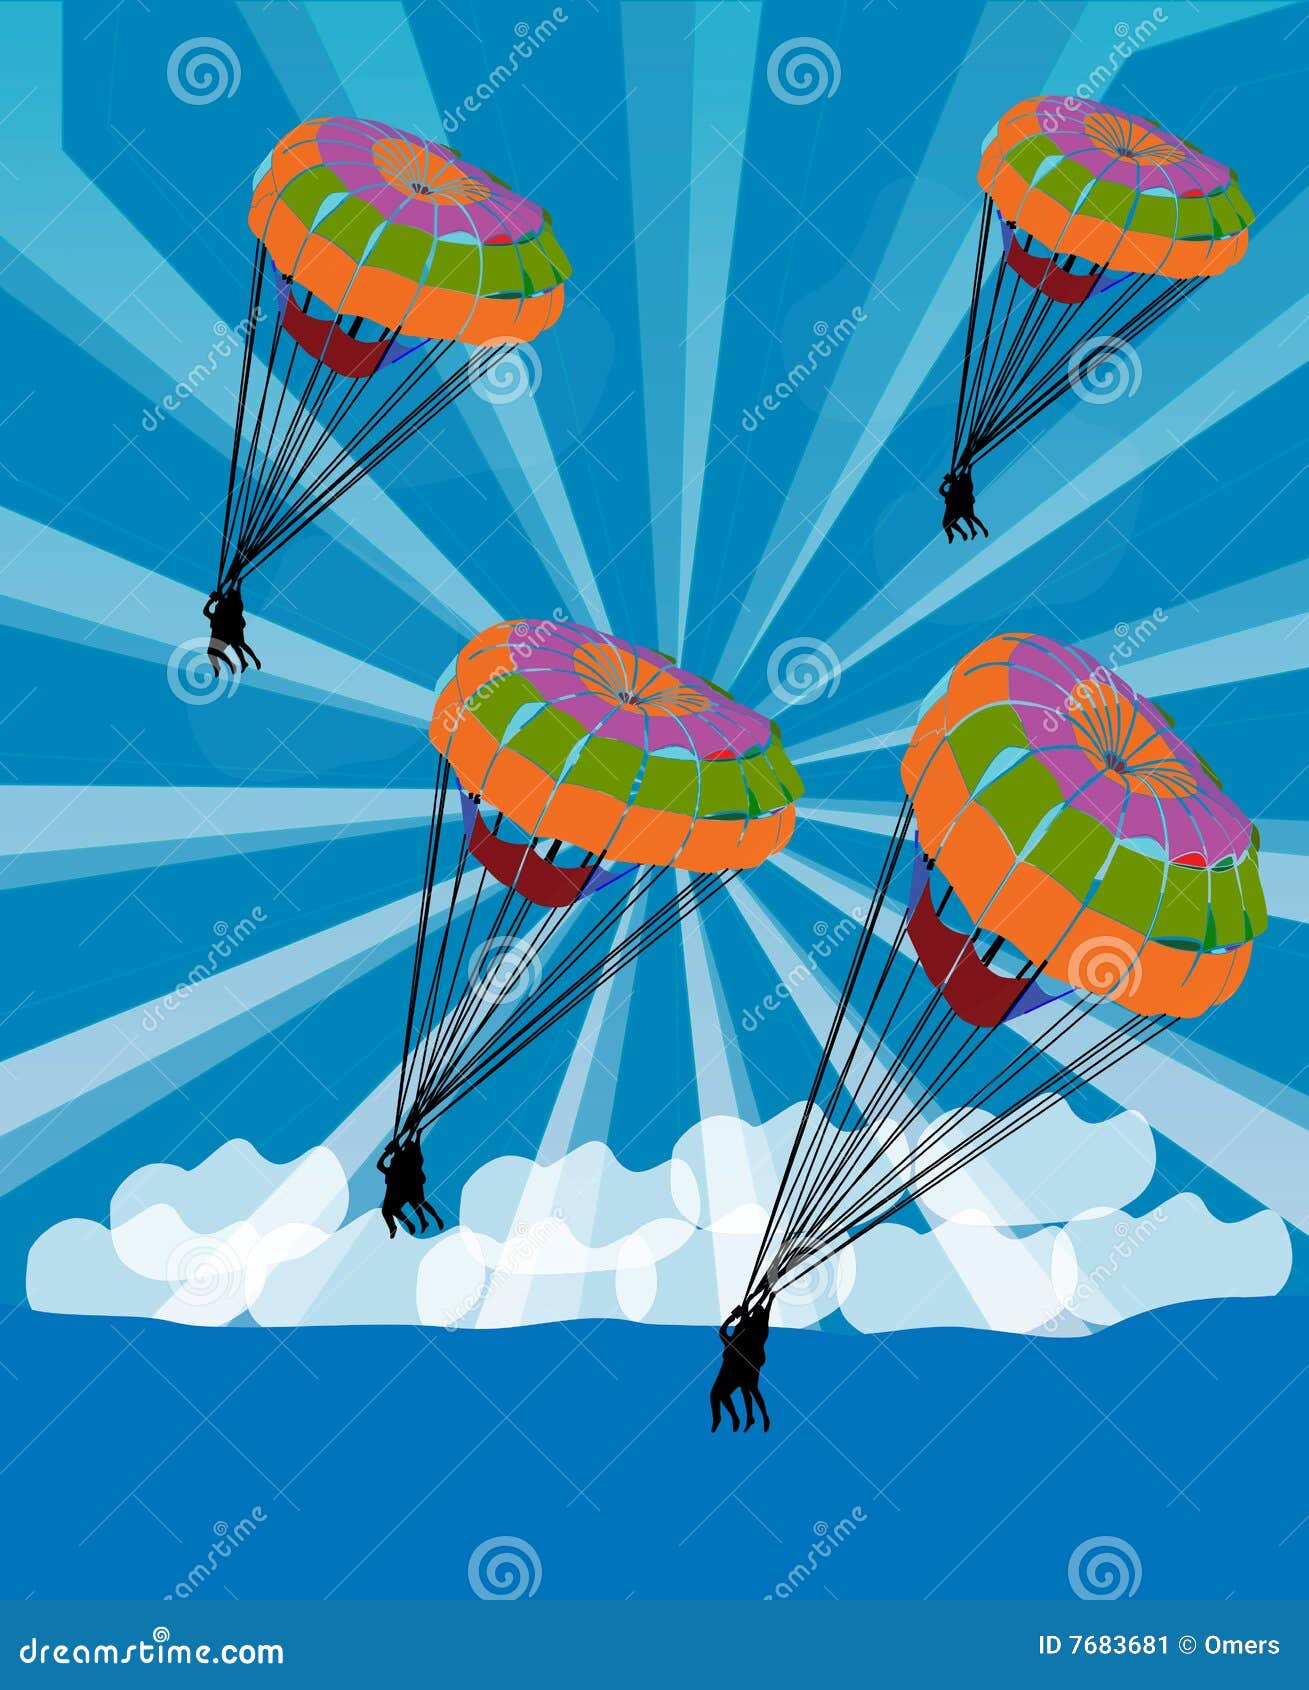 parachutist glide in the sky